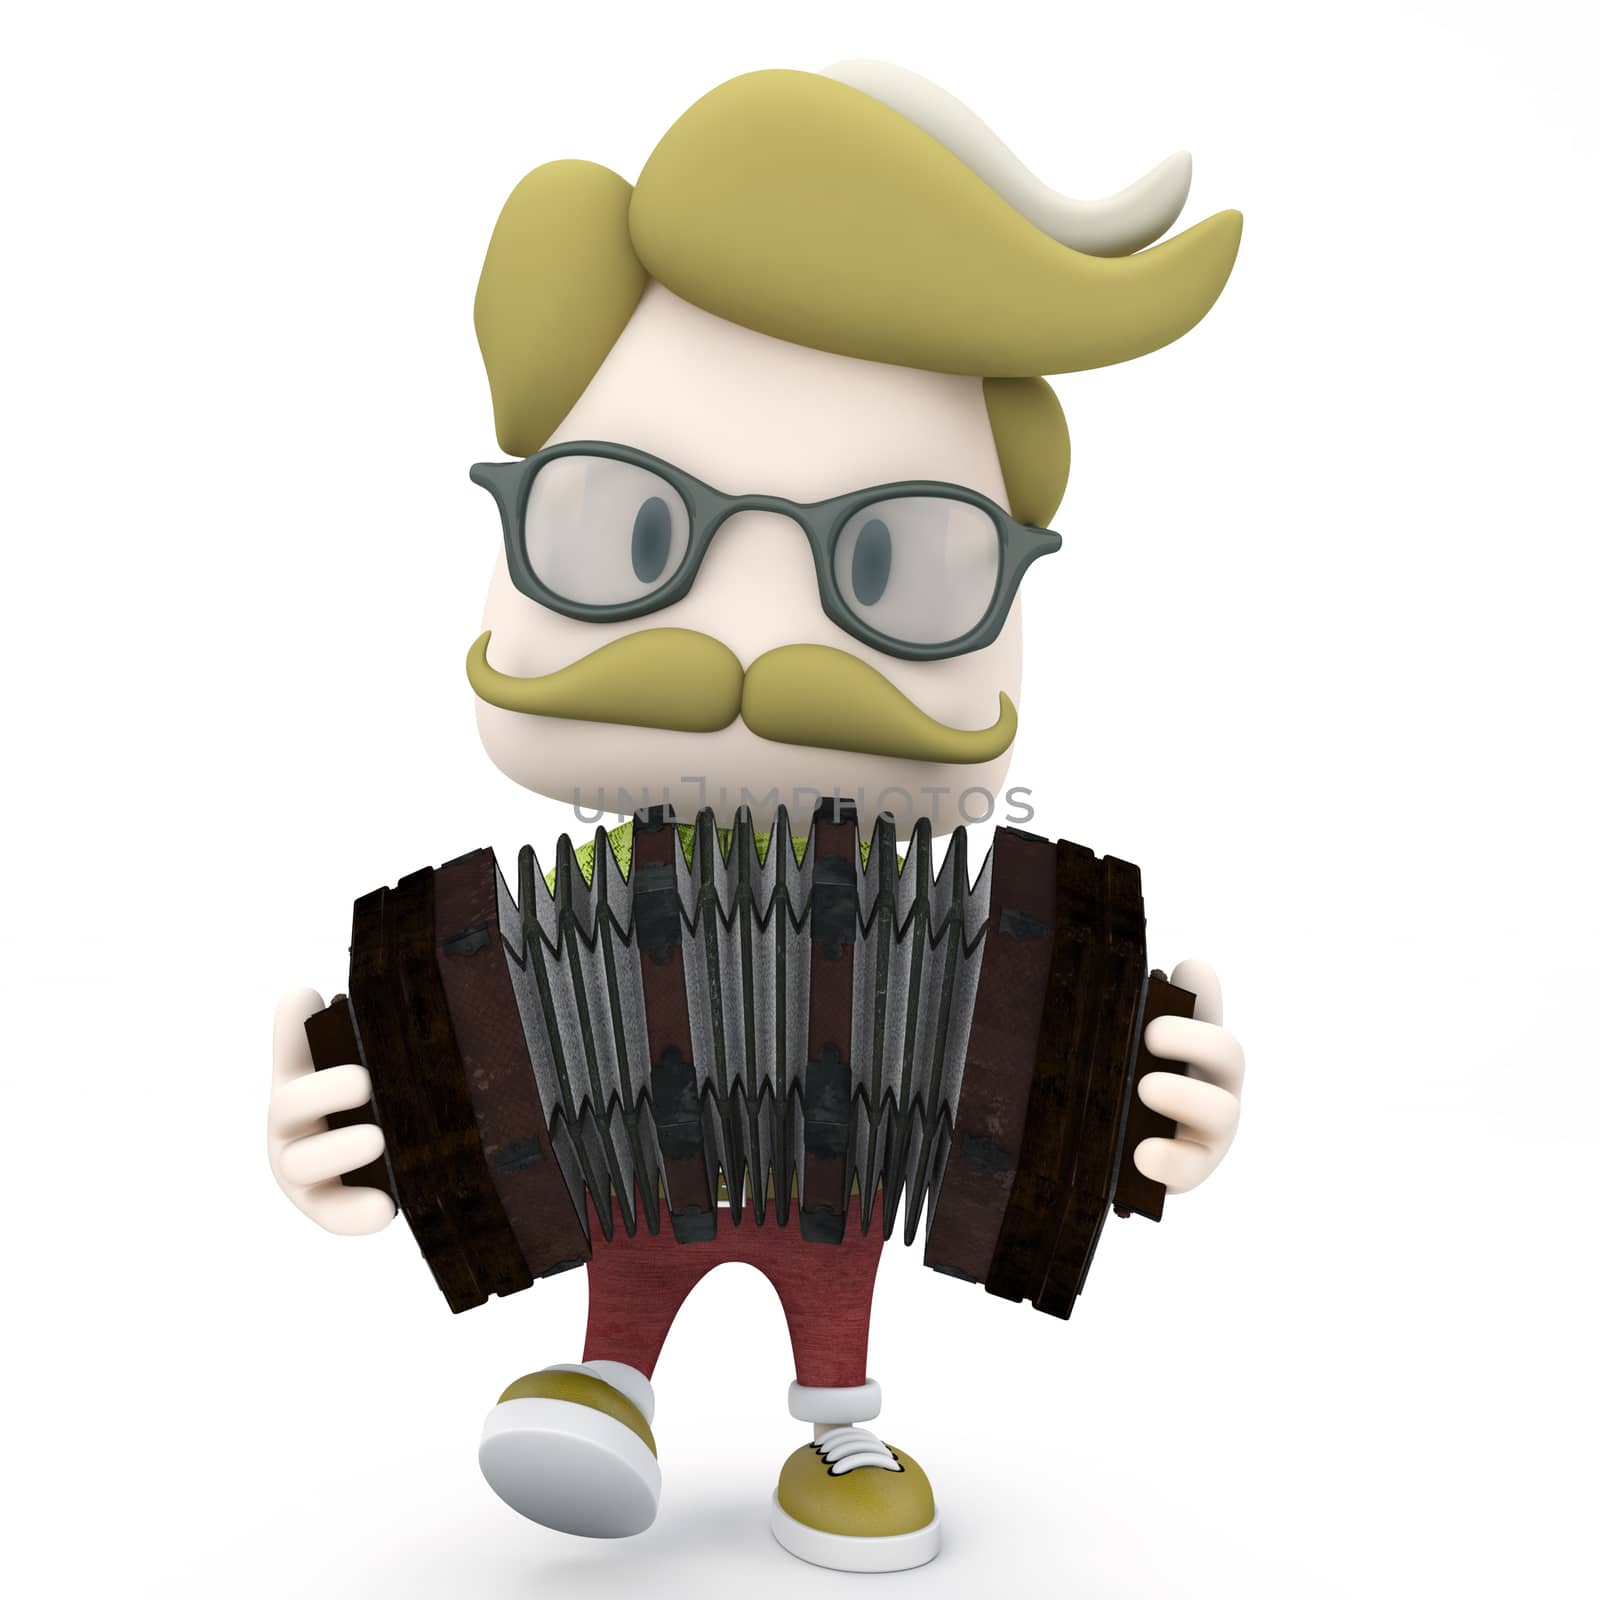 Hipster Man Playing Accordion by Zzoplanet